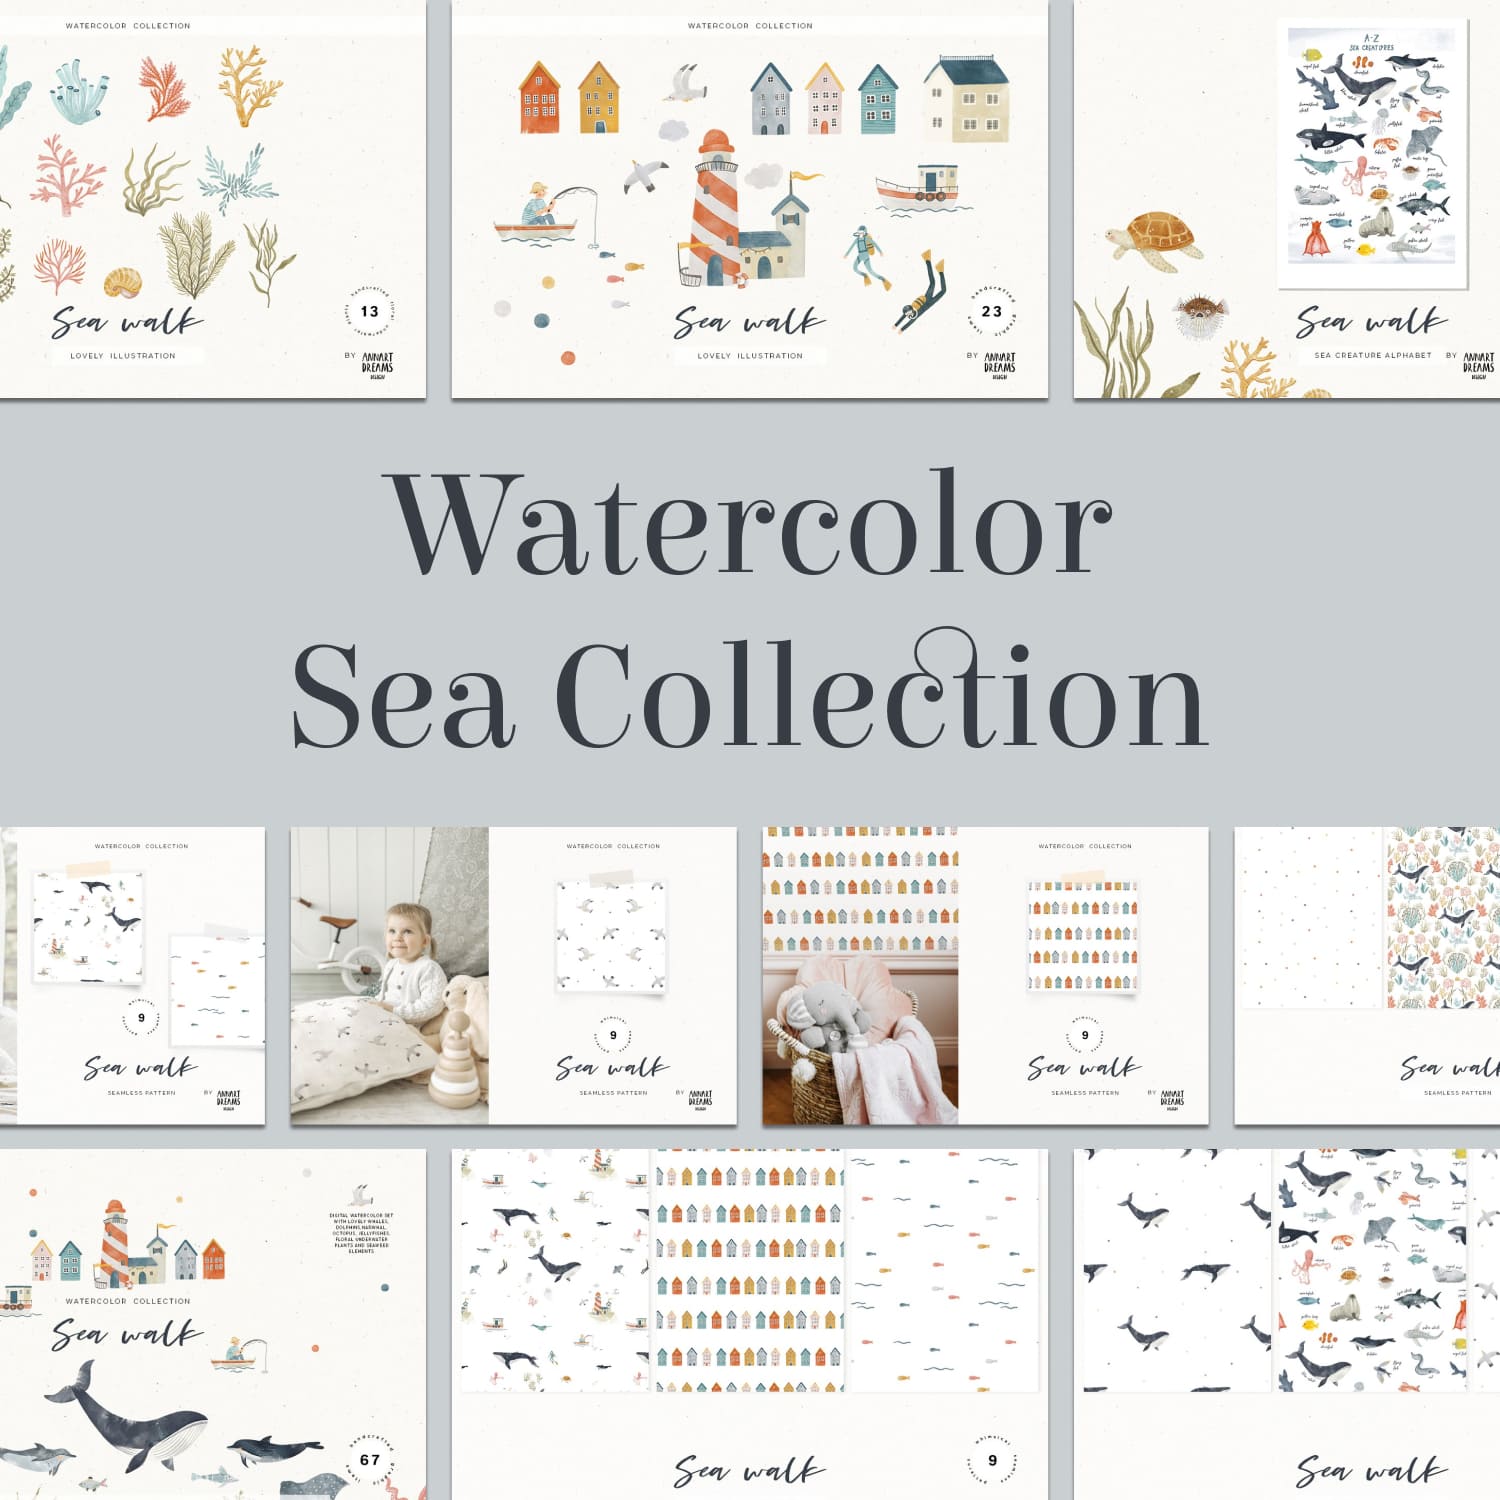 Watercolor Sea Graphics Collection cover image.